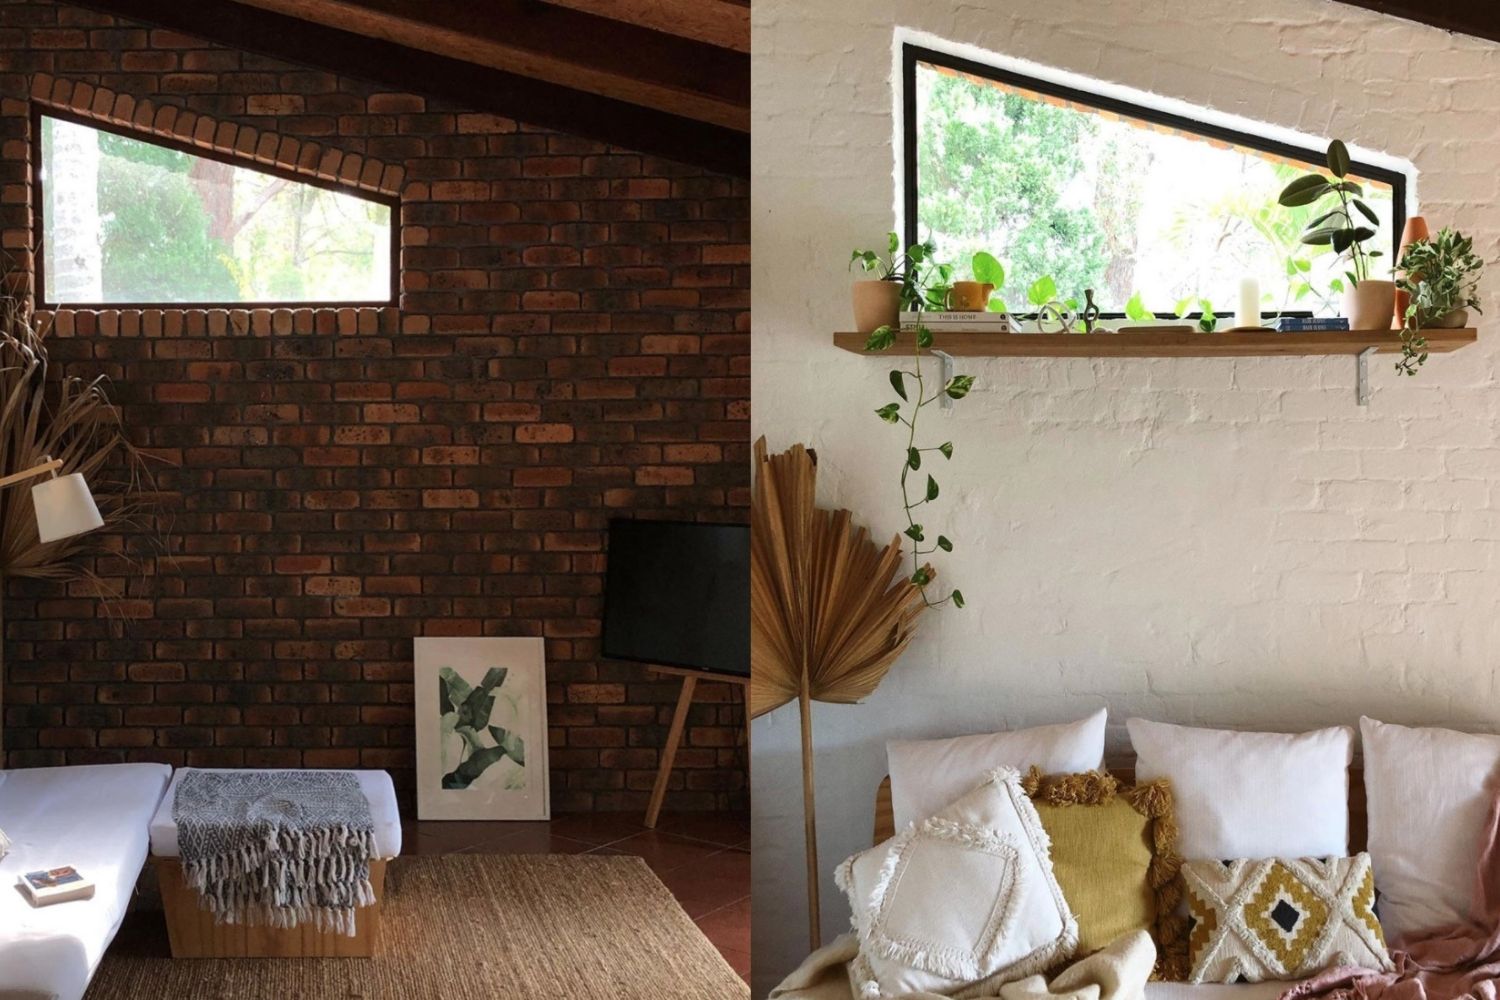 Bagging a House: How to Bag a Brick Wall - Cost, Colours & Ideas